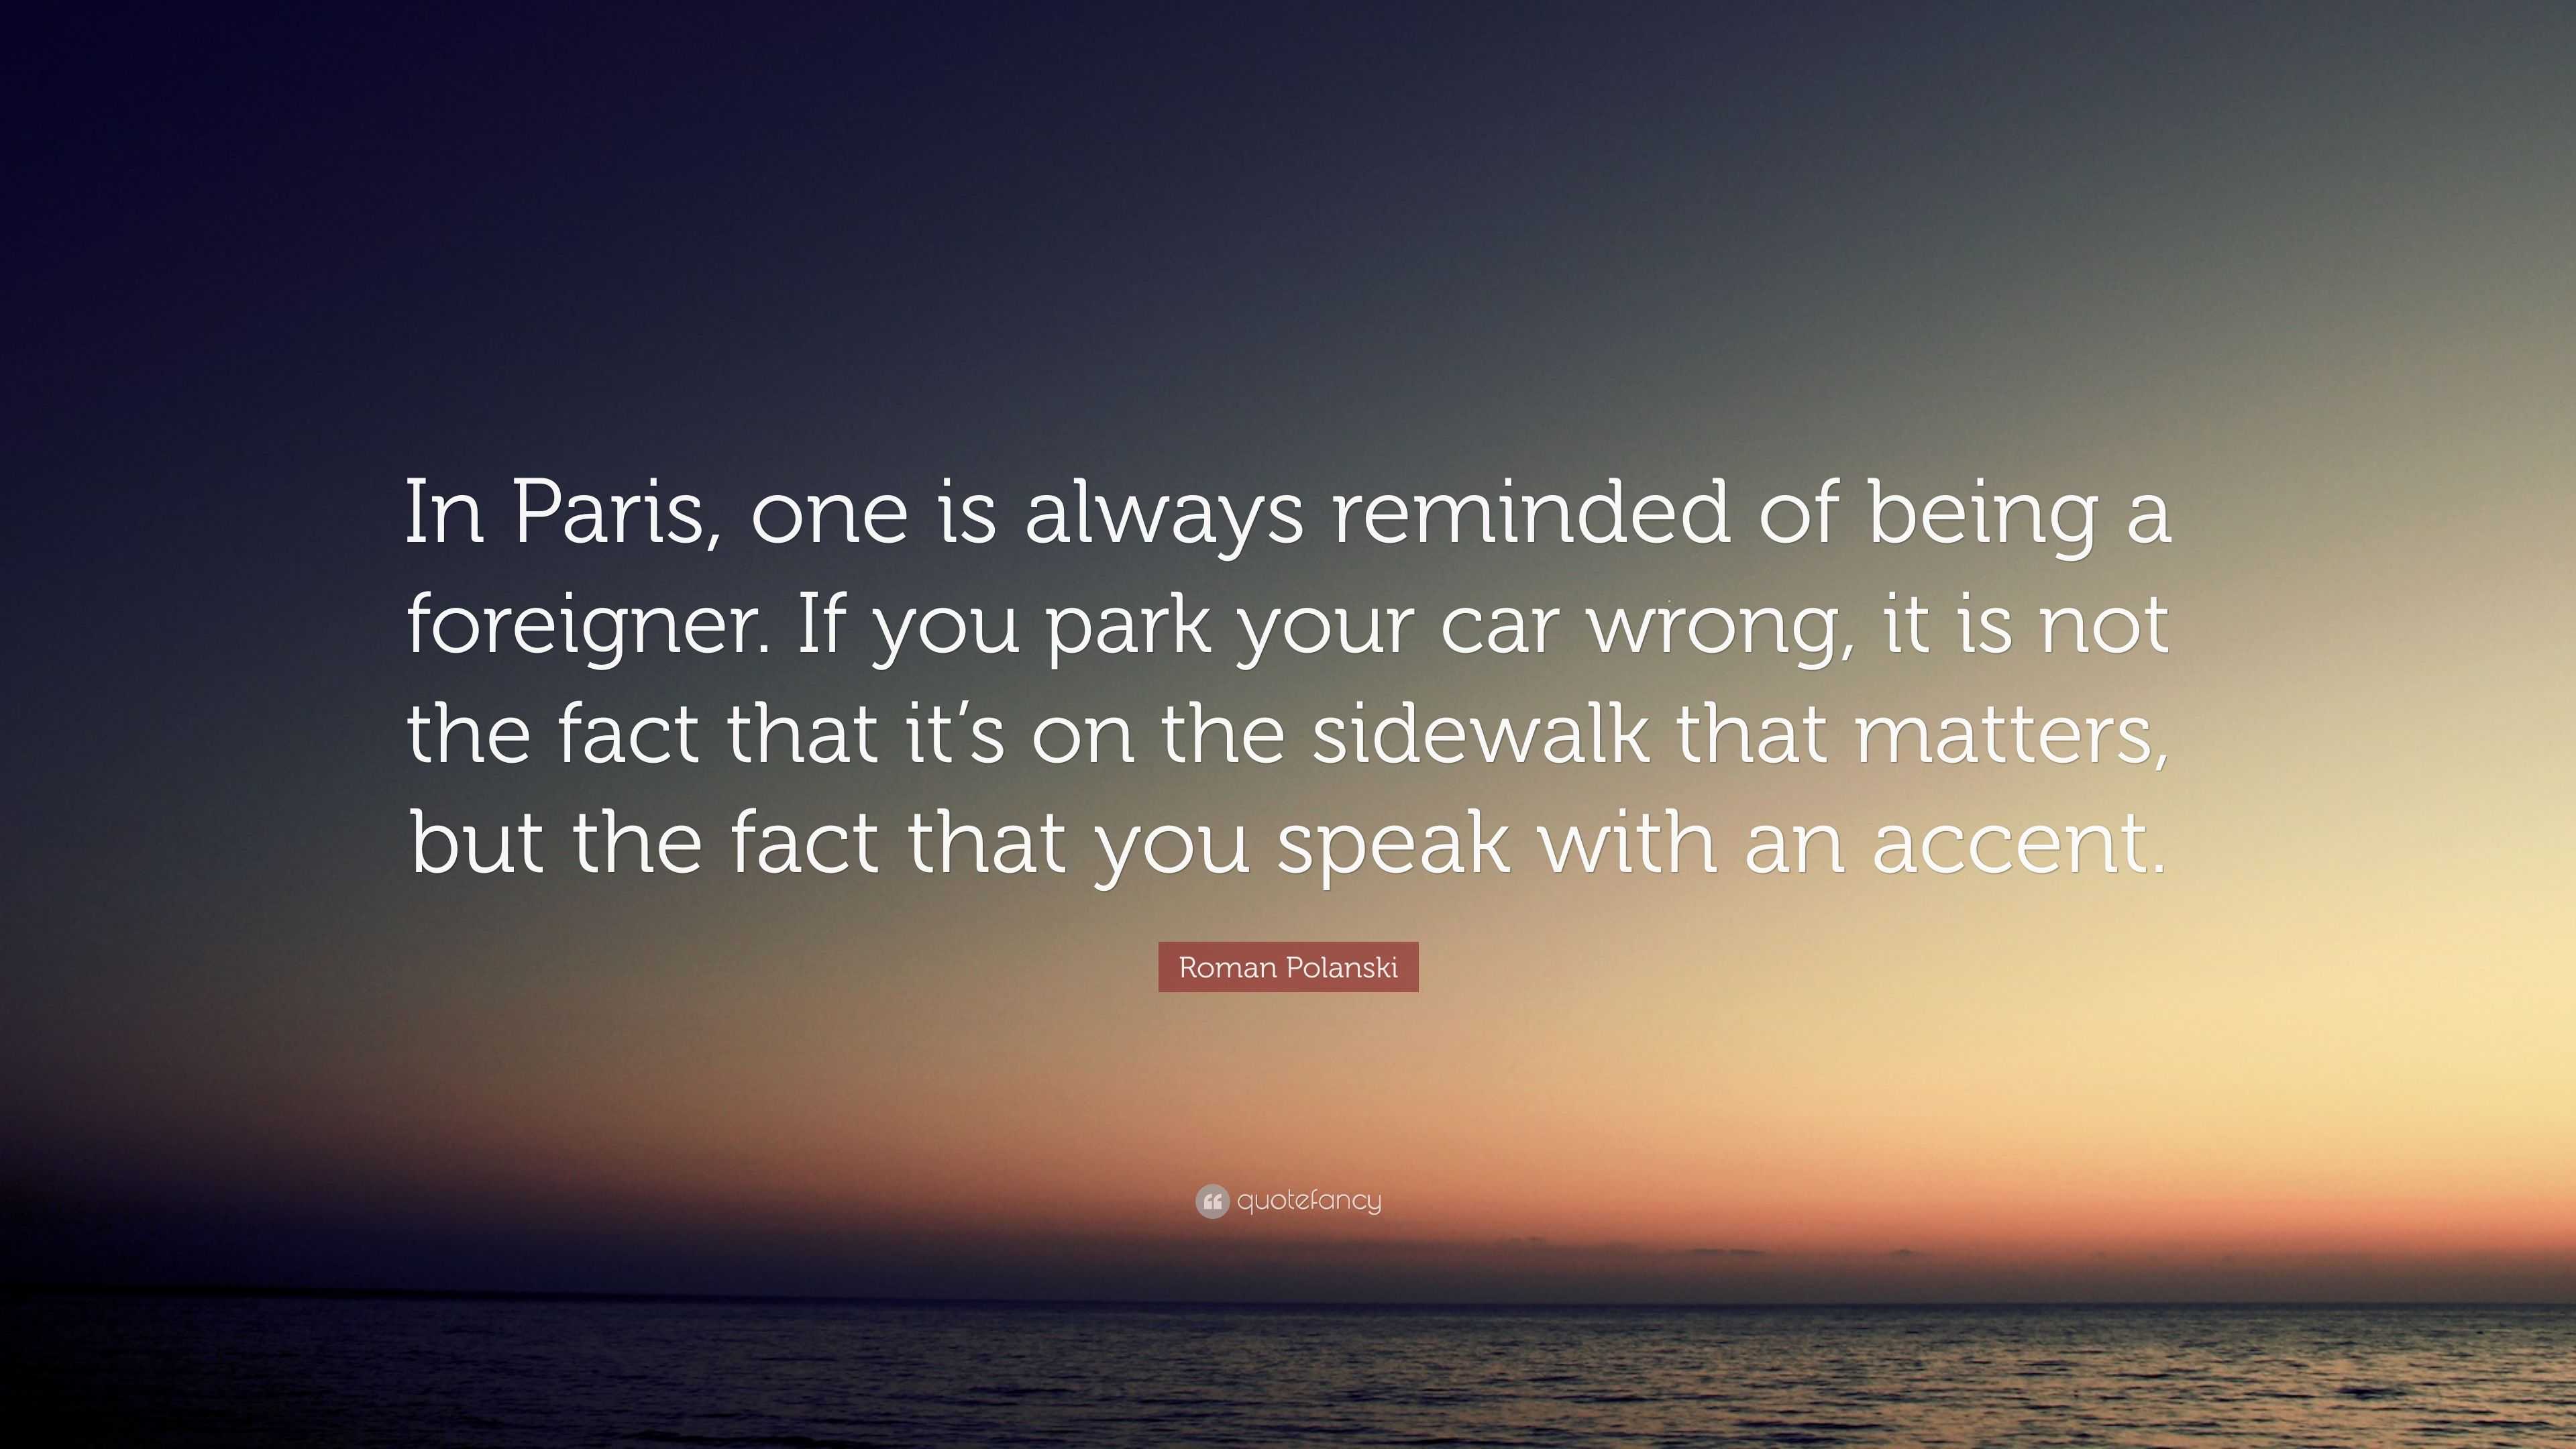 Roman Polanski Quote: “In Paris, one is always reminded of being a ...